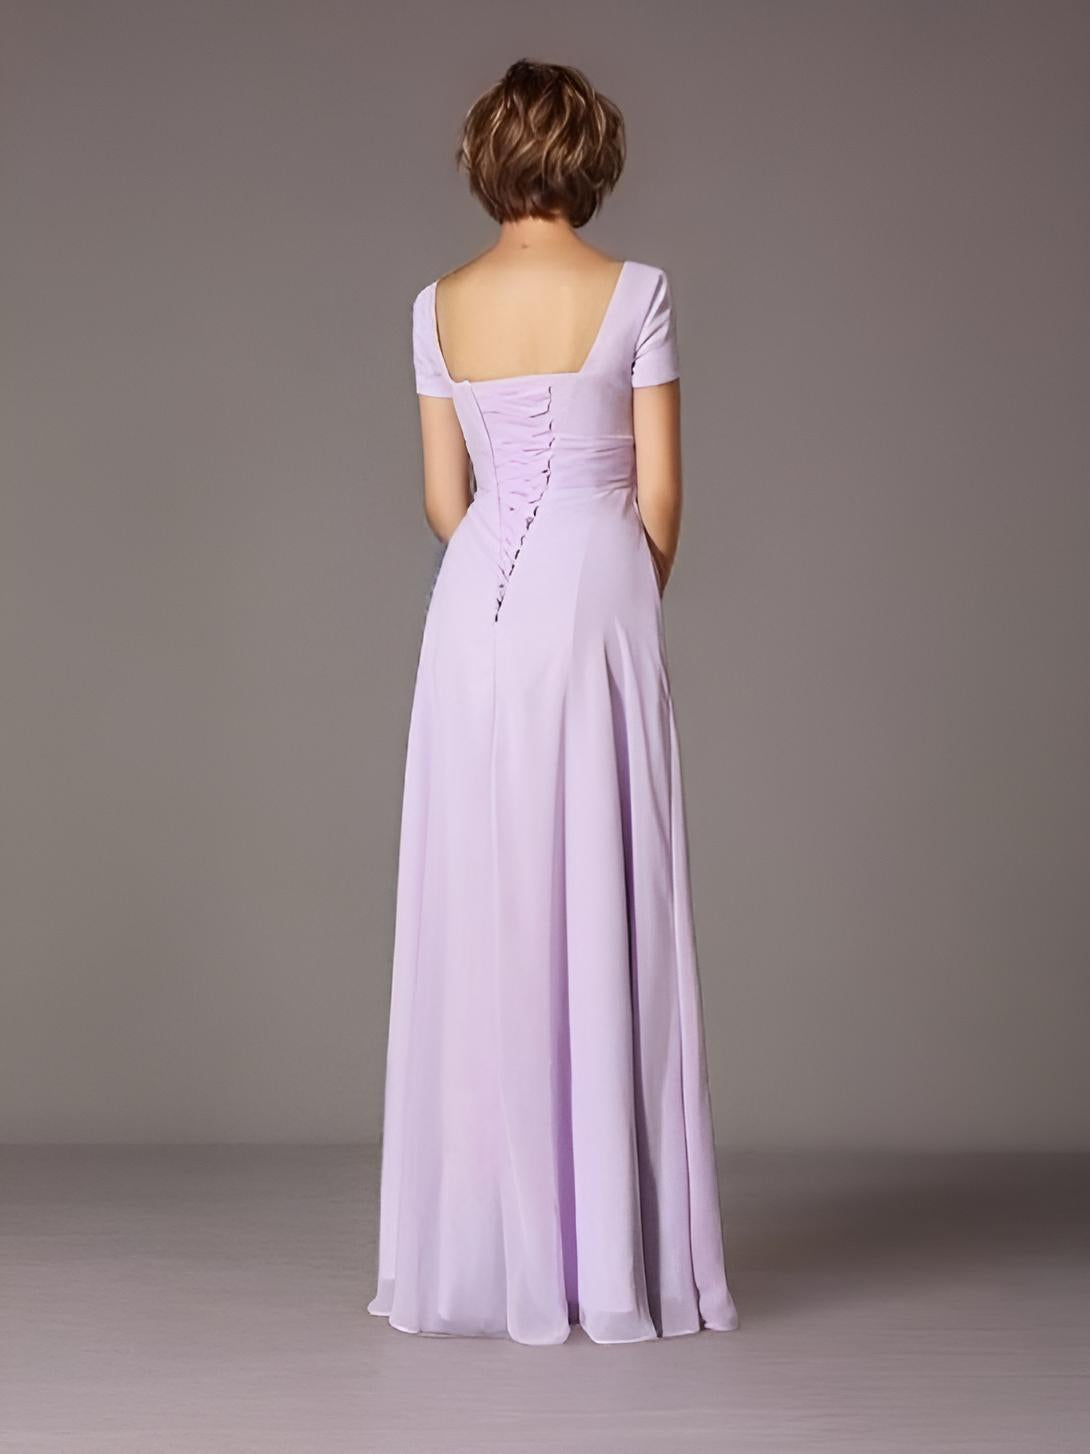 Woman in Stunning Lilac A-Line Dress with lace up back for Wedding Events